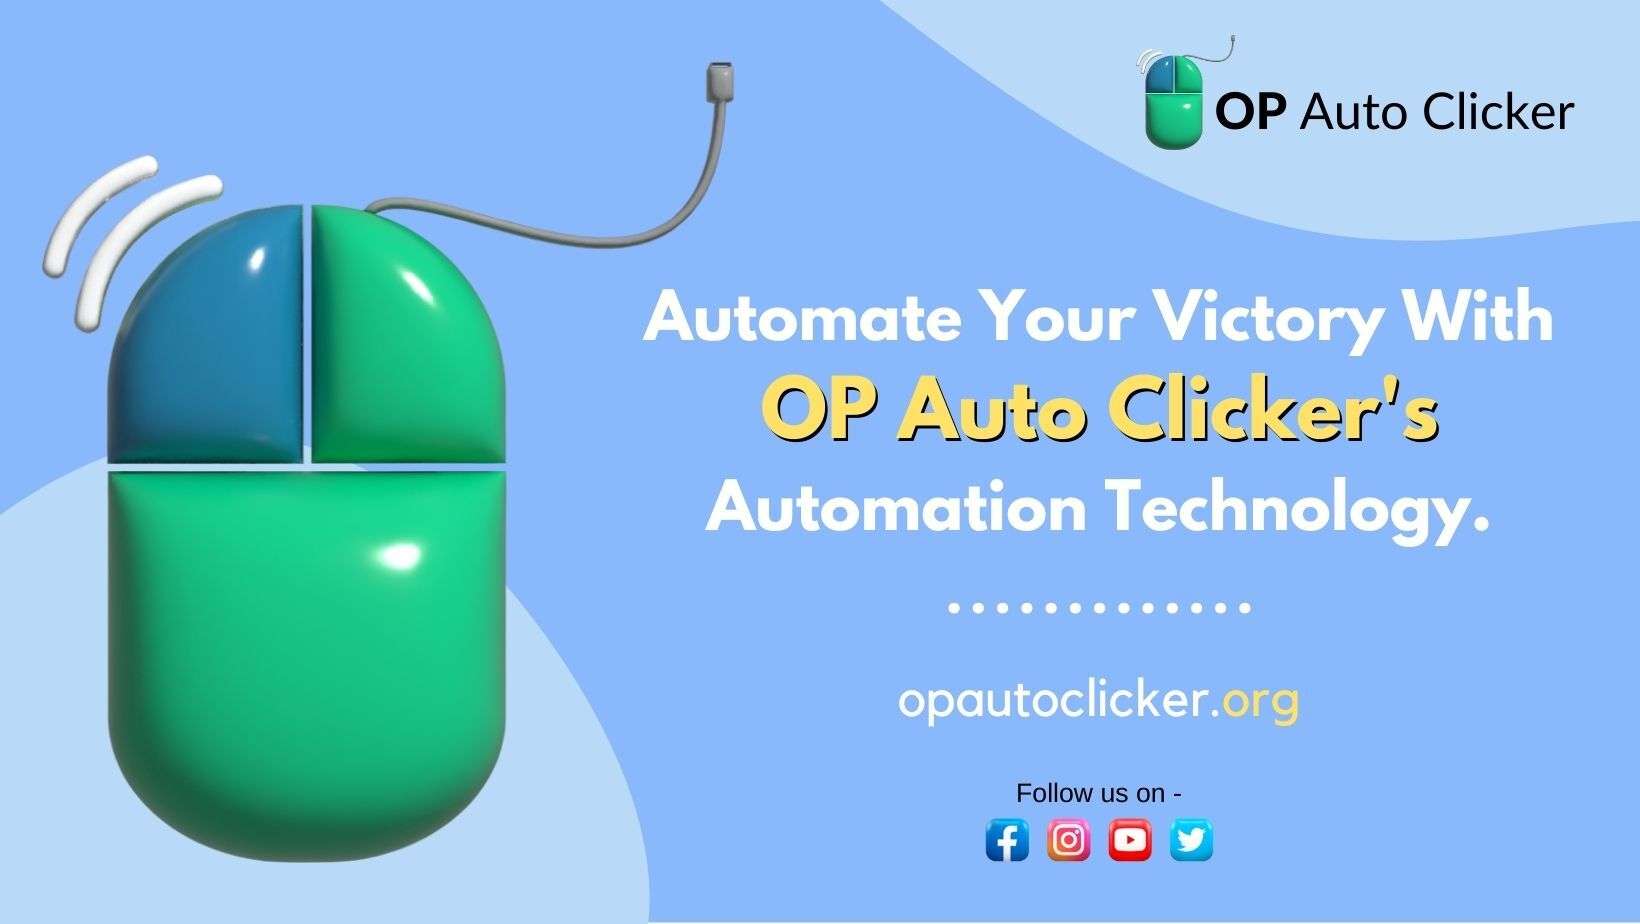 Op Auto Clicker - Automate your Victory!